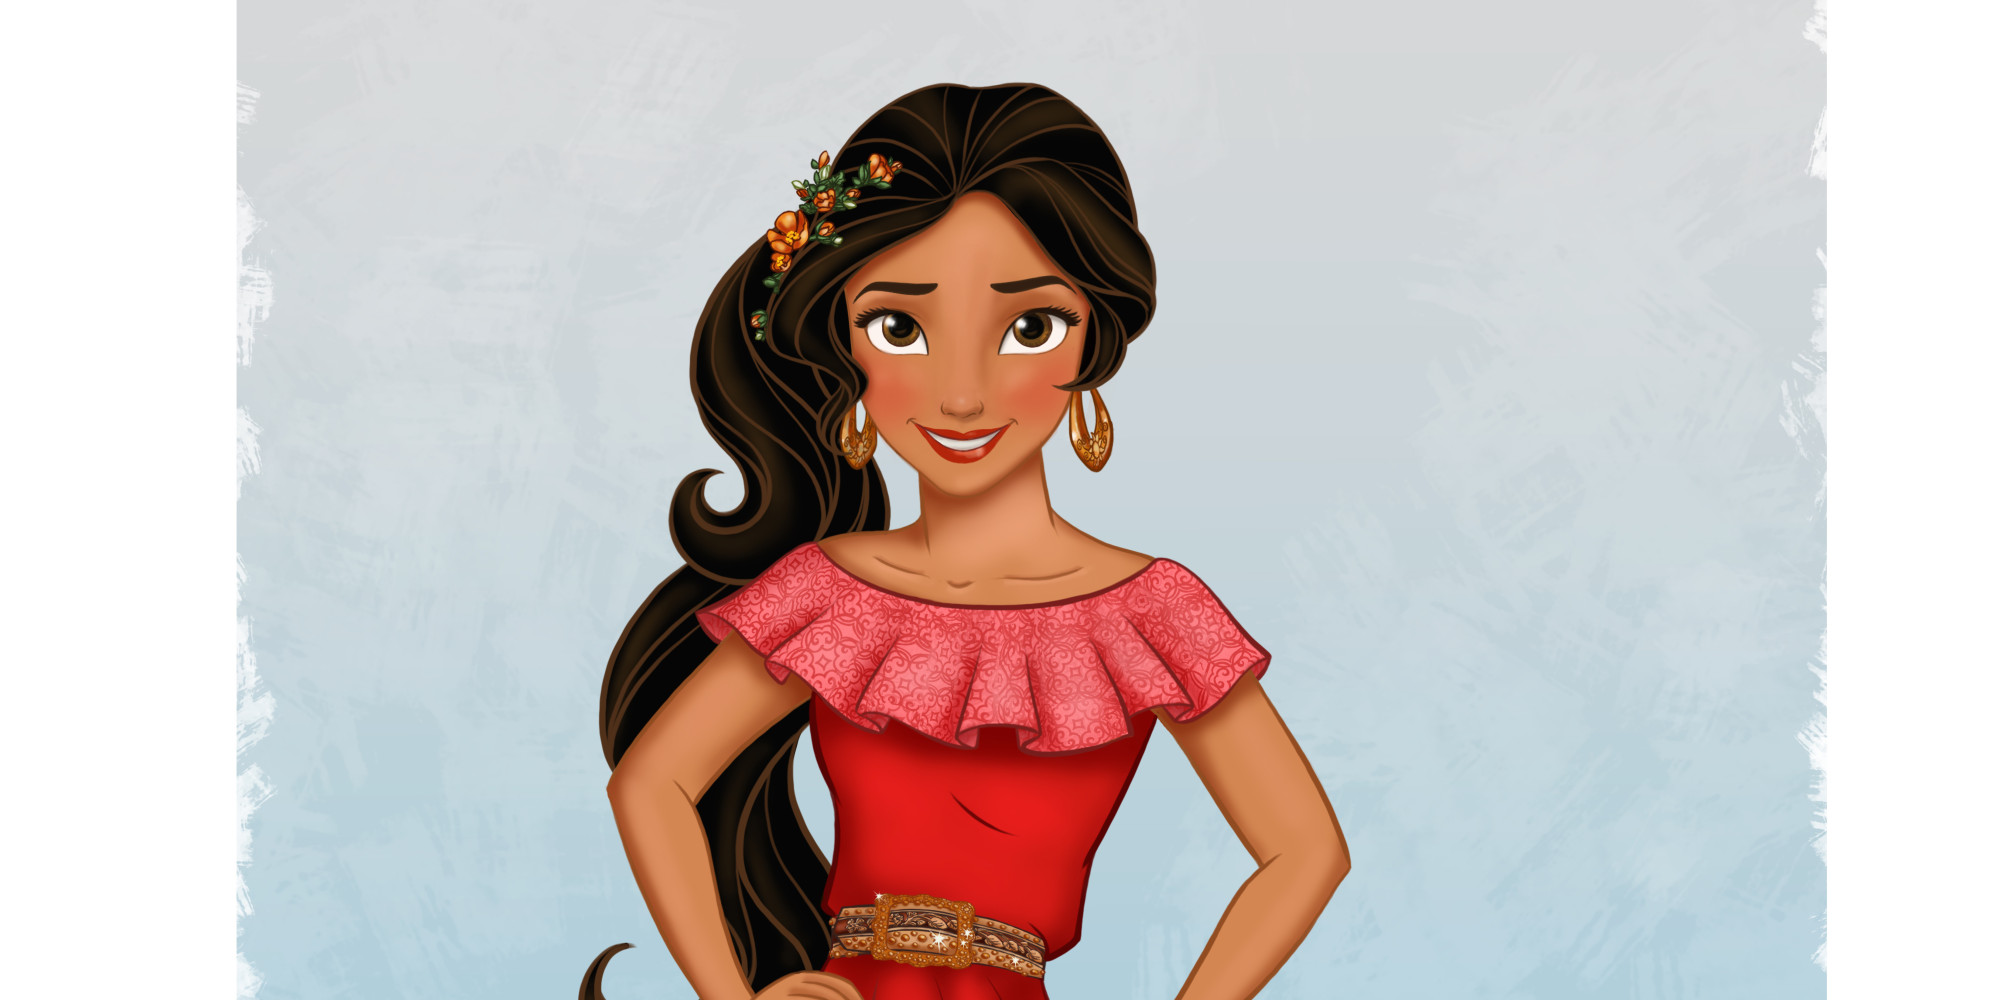 Sorry, Disney's New Princess Elena Probably Doesn't Count 